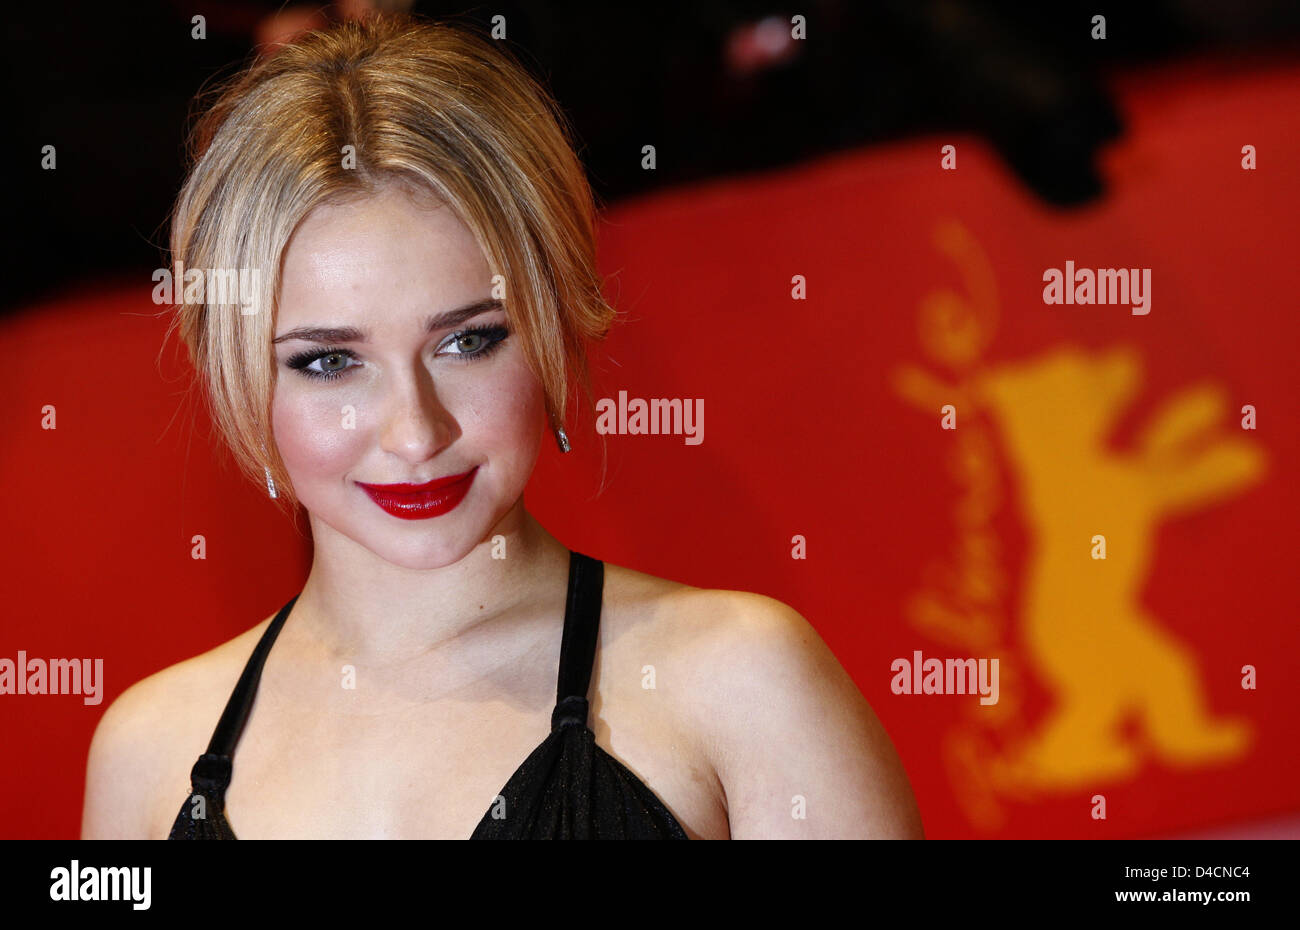 US actress Hayden Panettiere arrives for the premiere of her film 'Fireflies in the Garden' at the 58th Berlin International Film Festival in Berlin, 10 February 2008. The film runs in the competition at the 58th Berlinale. Photo: Jens Kalaene Stock Photo